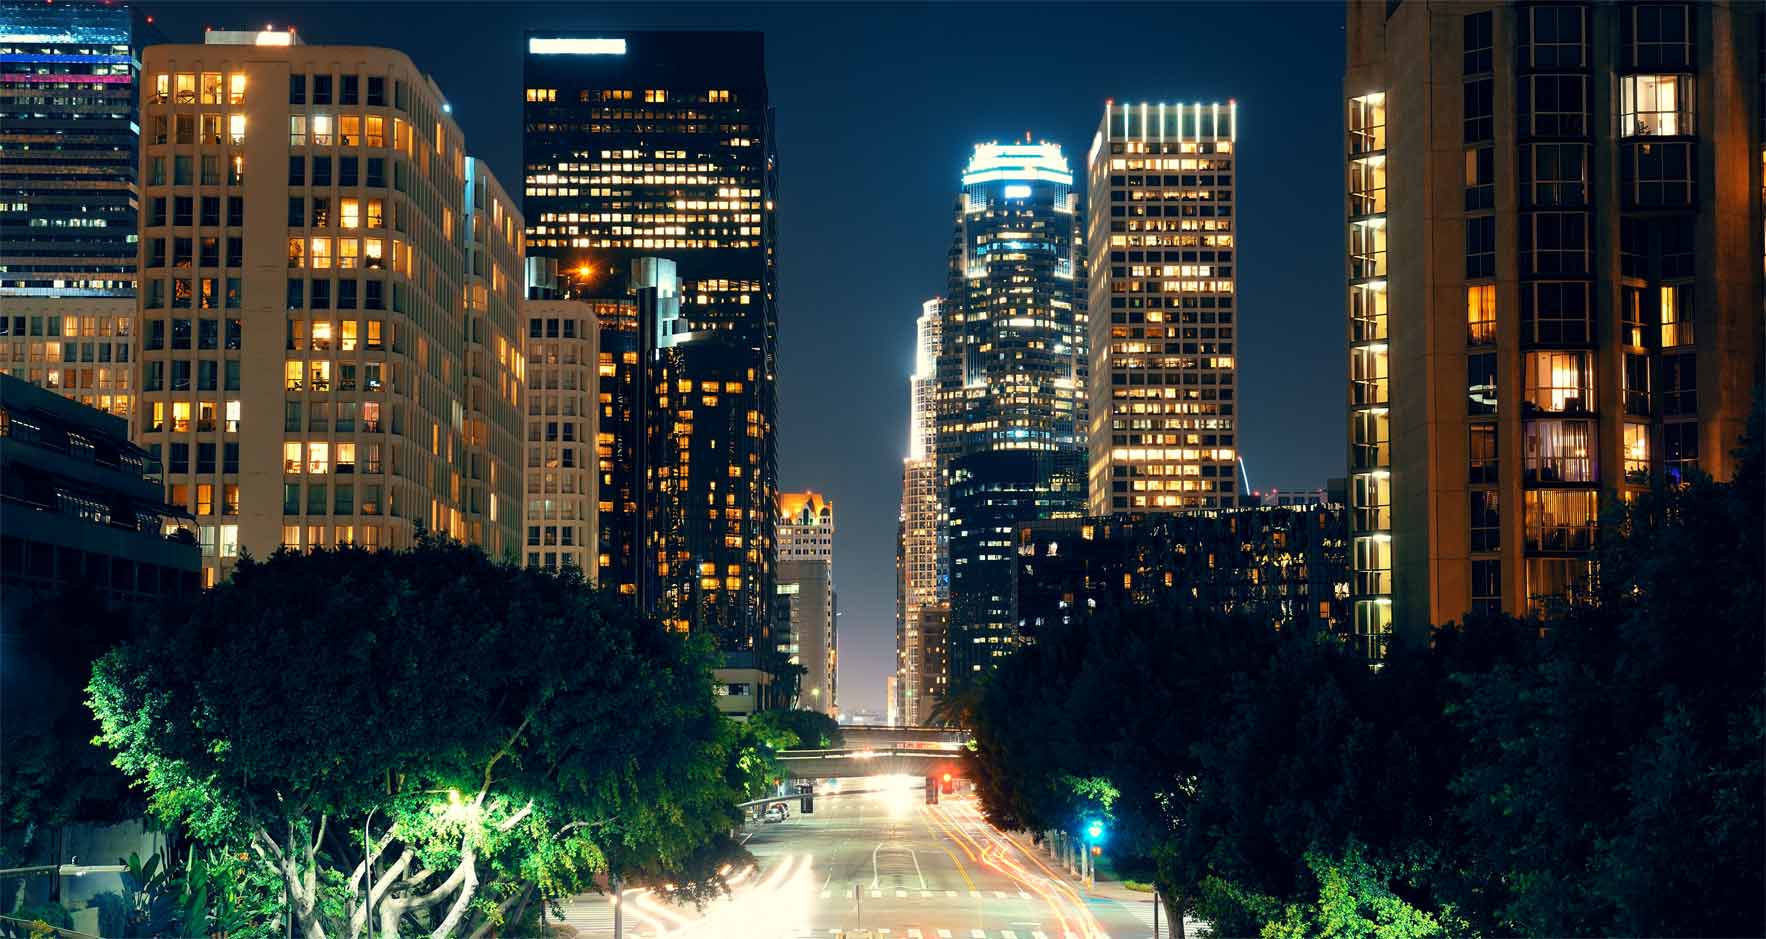 Los Angeles downtown street view at night